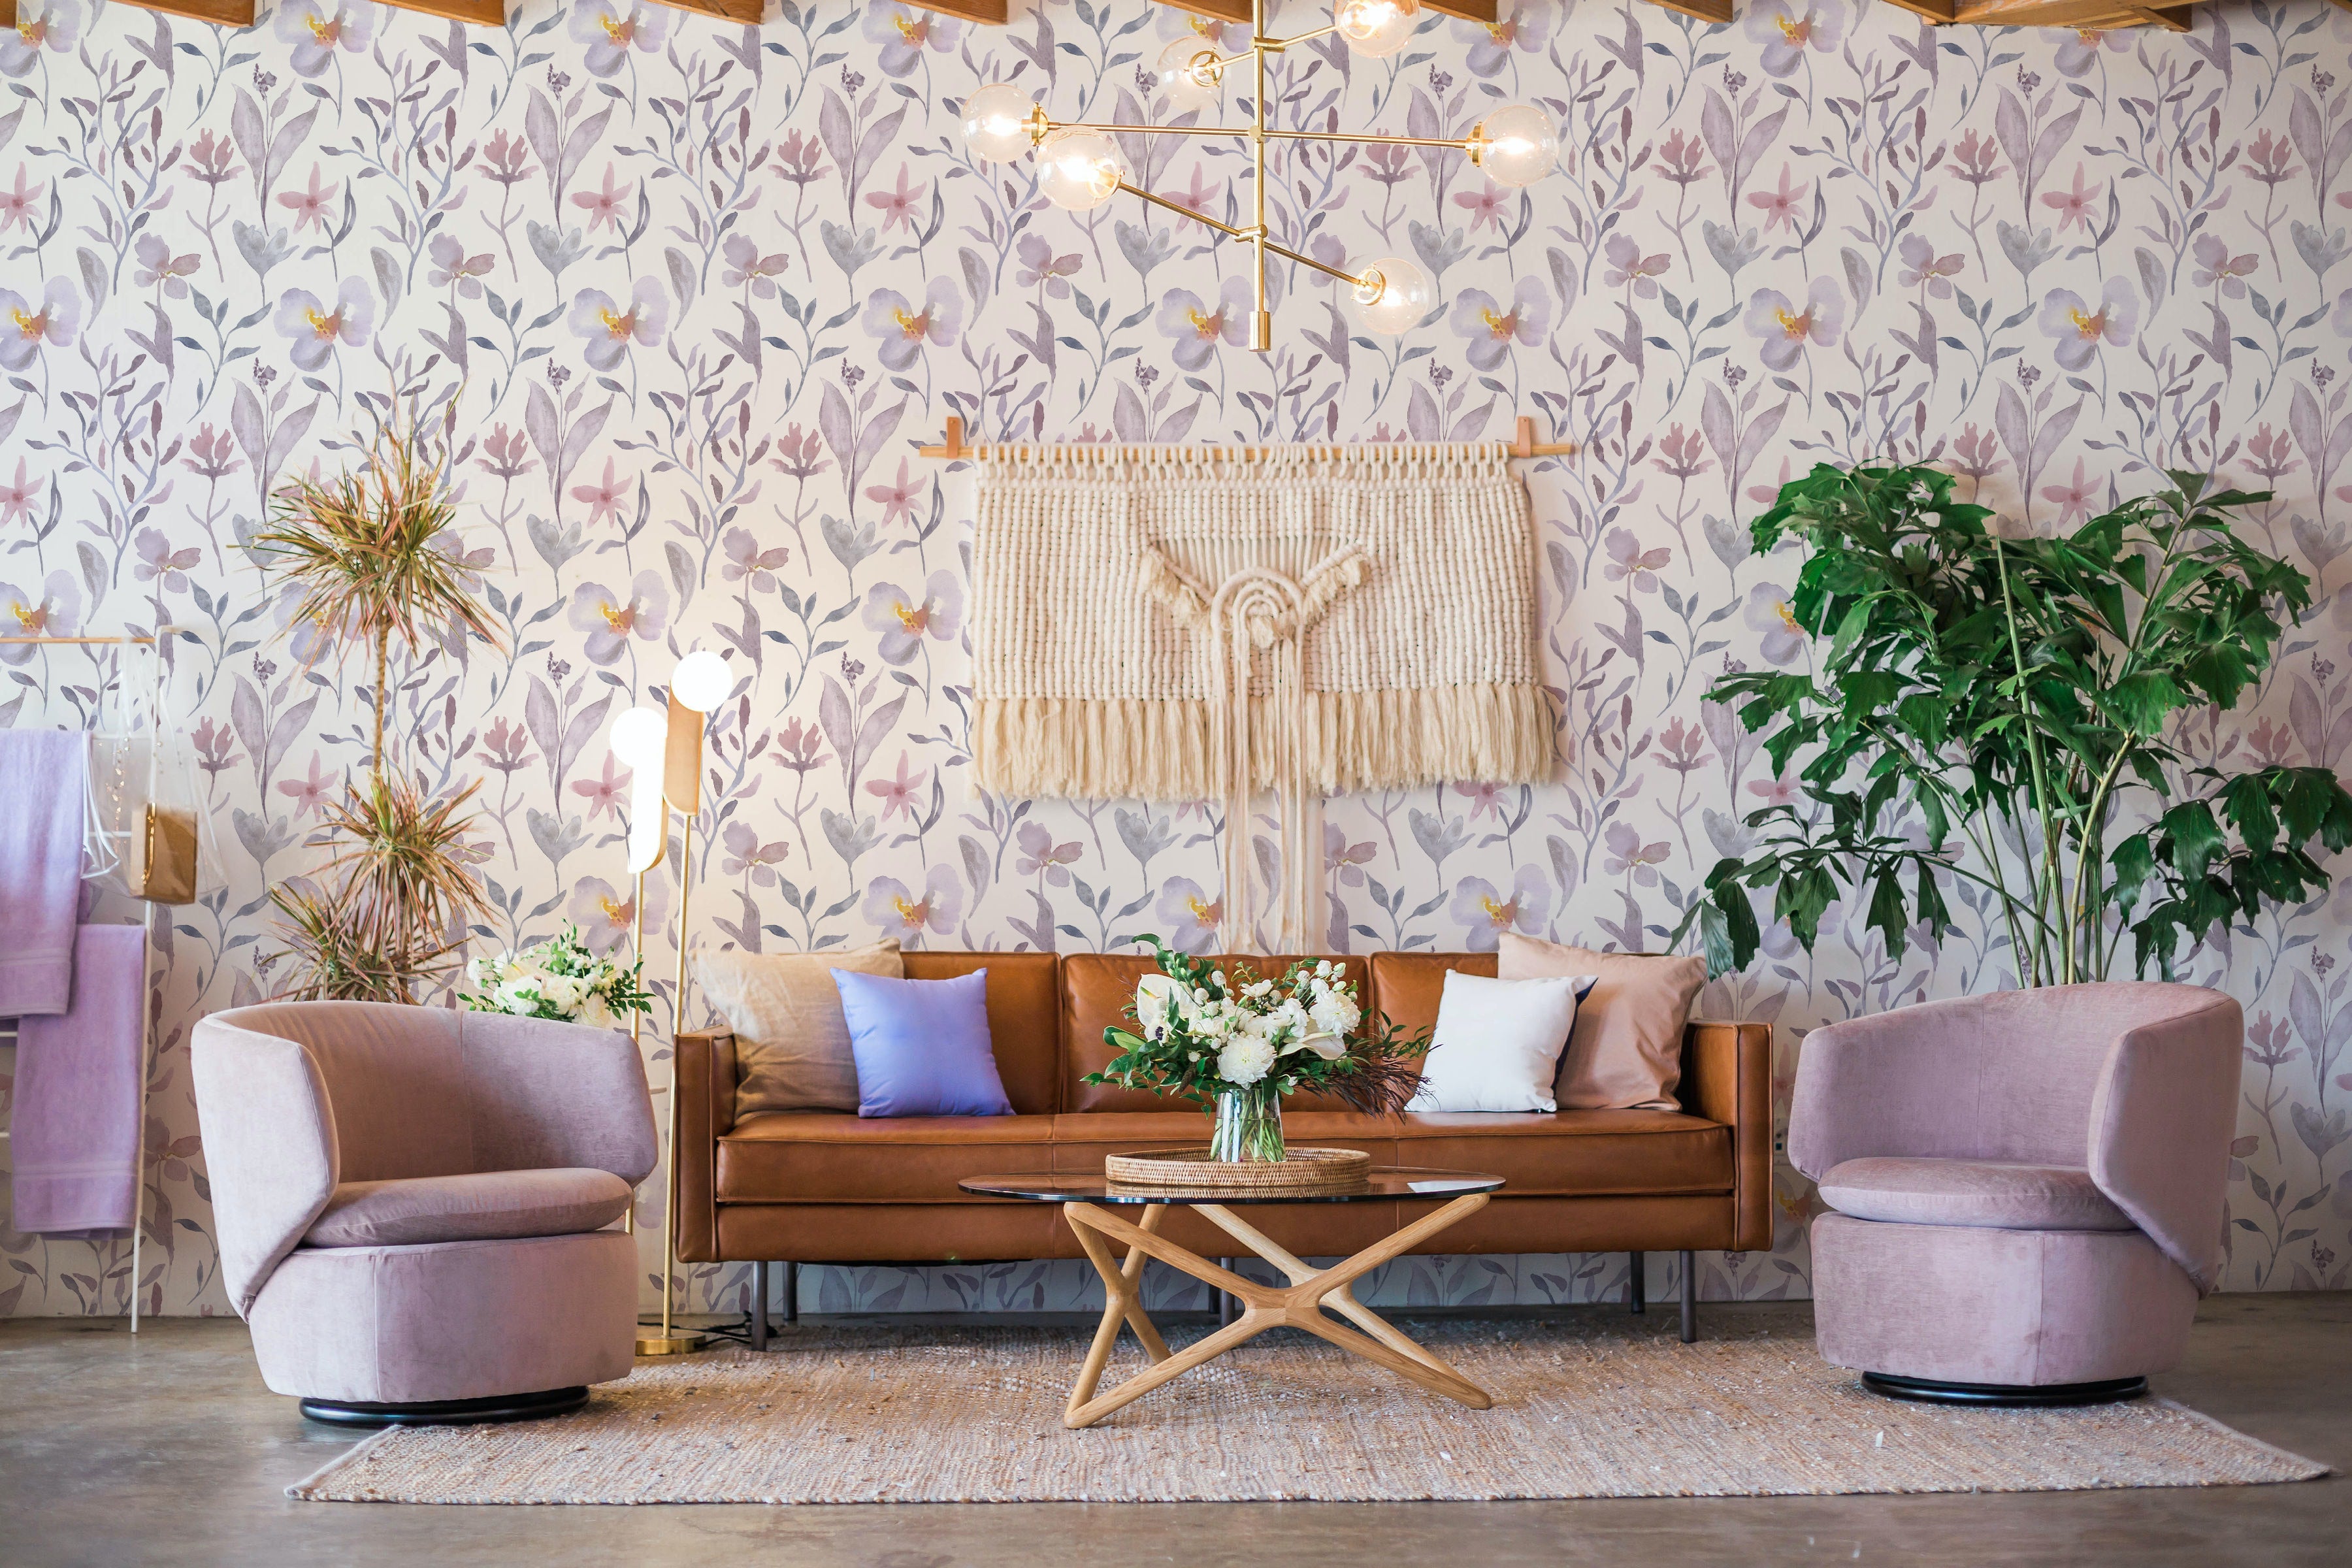 Elegant living room enhanced with Watercolor Garden Wallpaper, showcasing vibrant purple and pink floral designs amidst grey leaves on a white backdrop. The room is furnished with modern decor including a leather sofa, purple chairs, and a wooden coffee table, complemented by soft lighting and a bohemian-style wall hanging, creating a warm and inviting ambiance